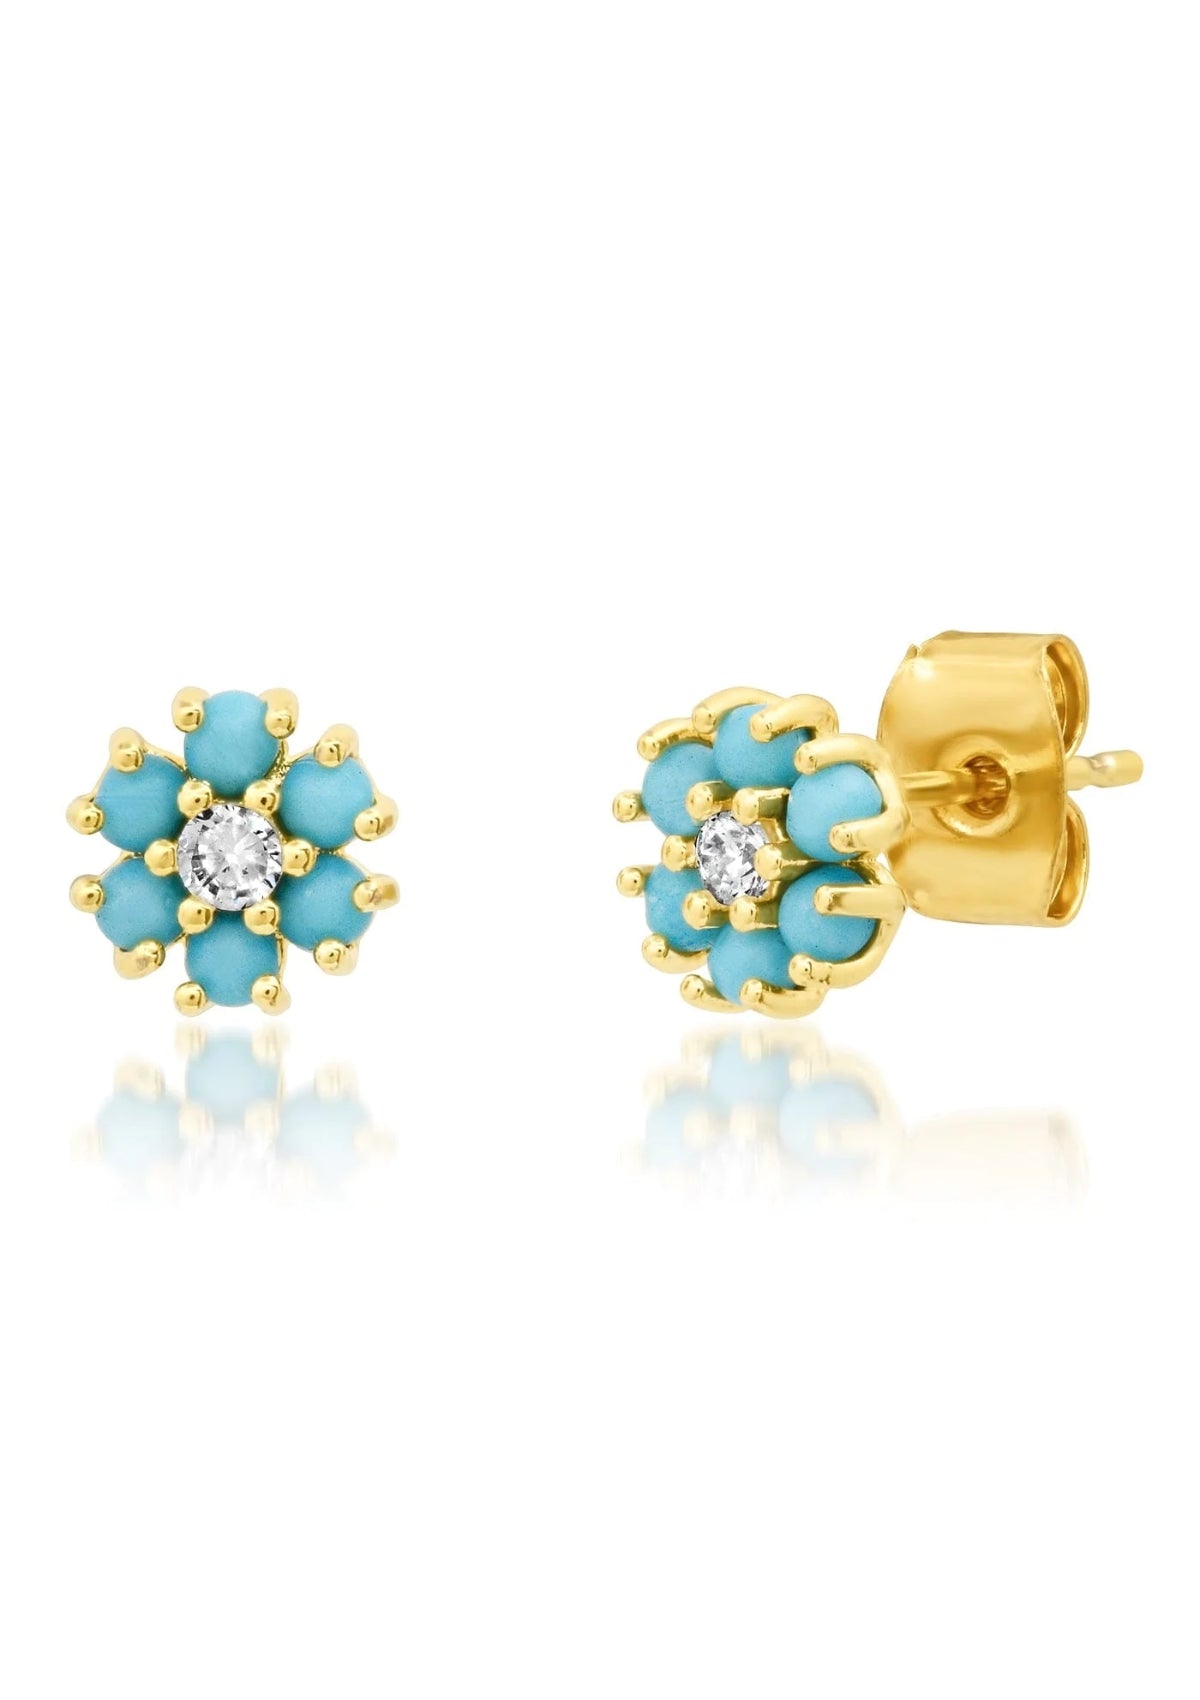 Turquoise Flower Post Earrings with Clear CZ Center